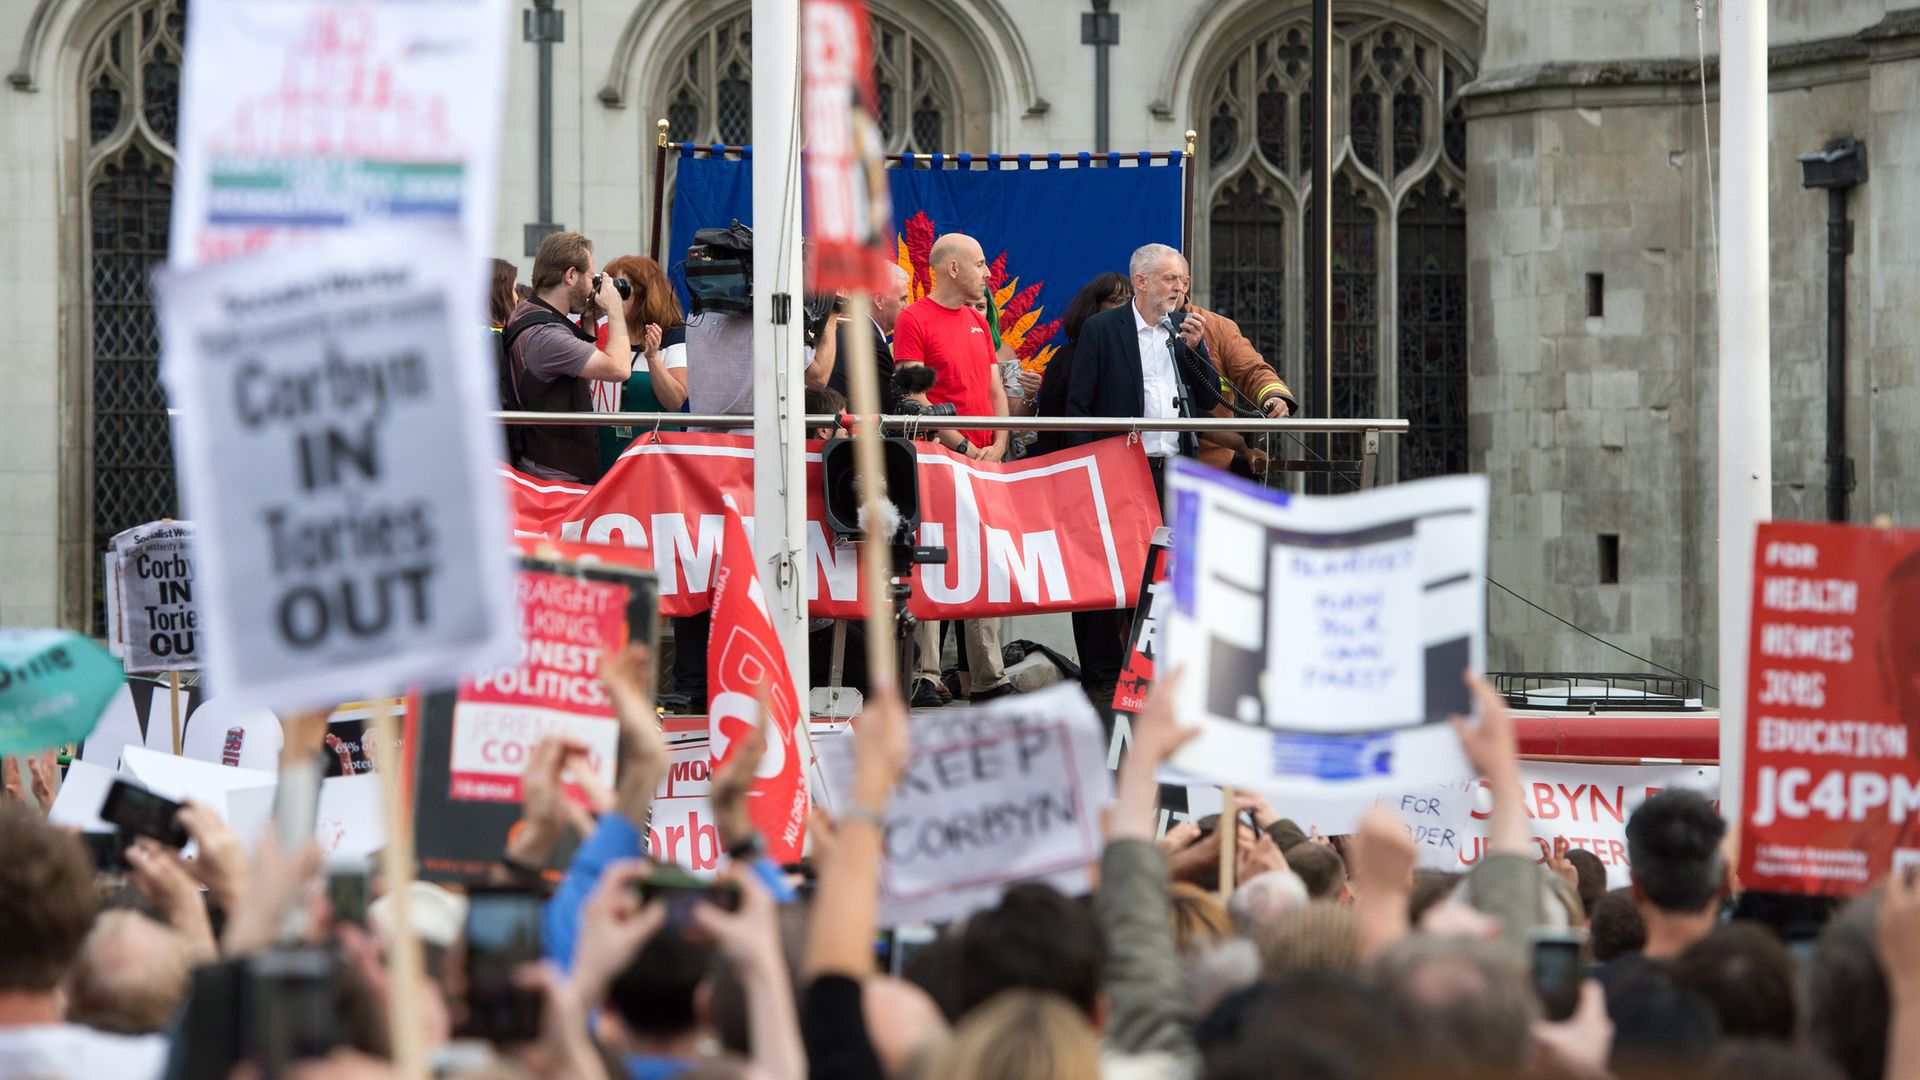 Jeremy Corbyn speaks in Parliament Square, where the Momentum campaign group held a "Keep Corbyn" demonstration. - Credit: PA